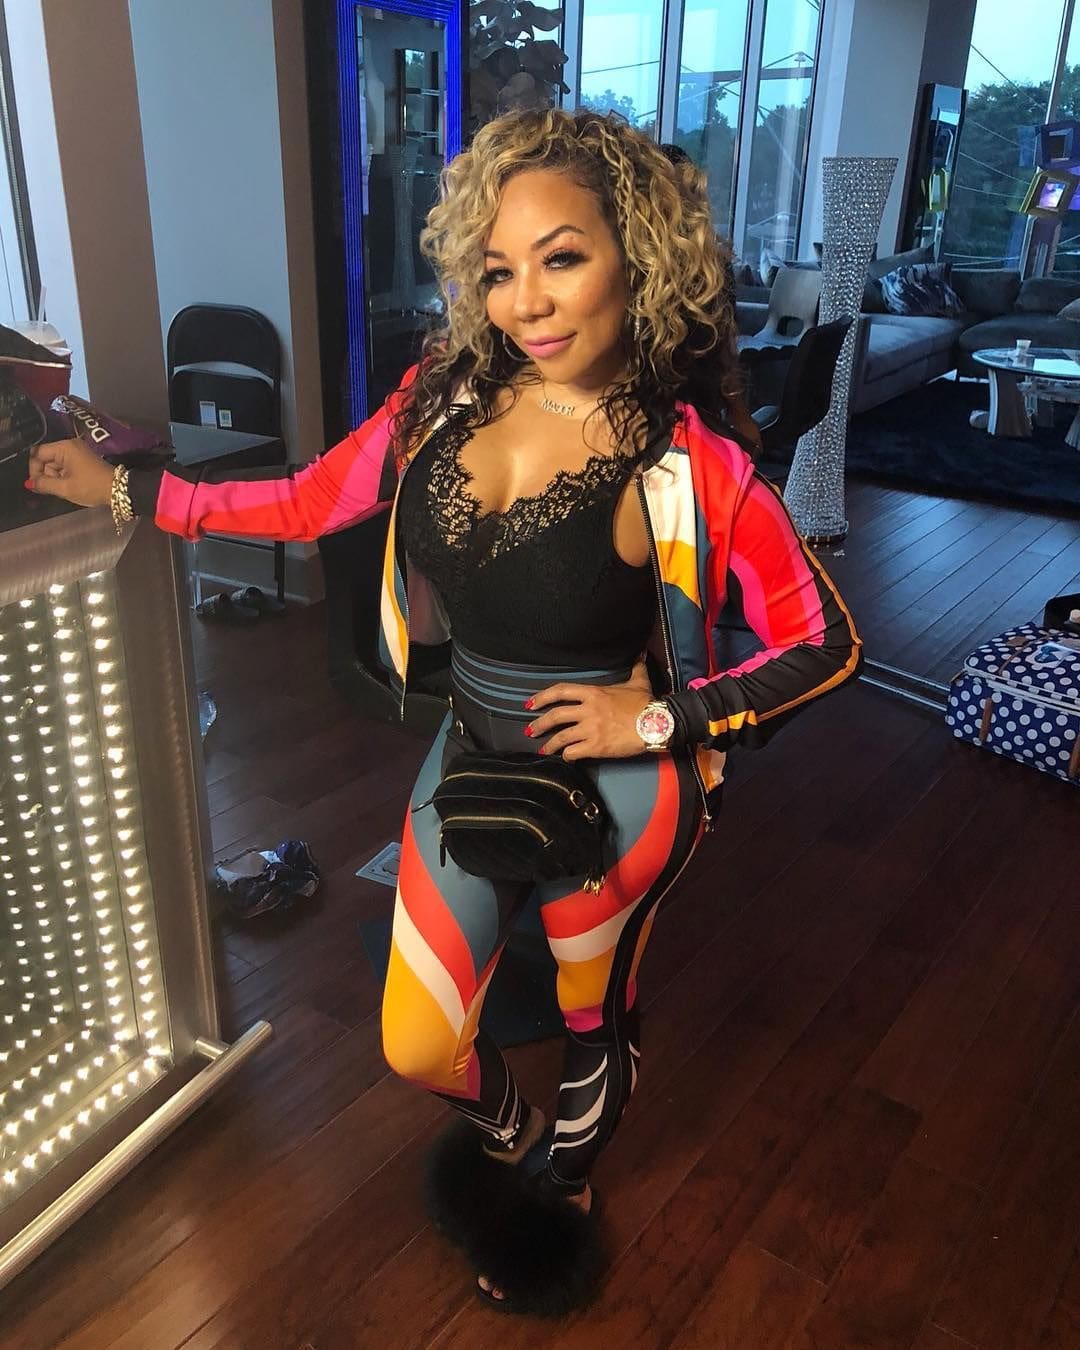 Tiny Harris' Recent Photo Has Fans Saying She Looks Like A Kid - Check It Out Here